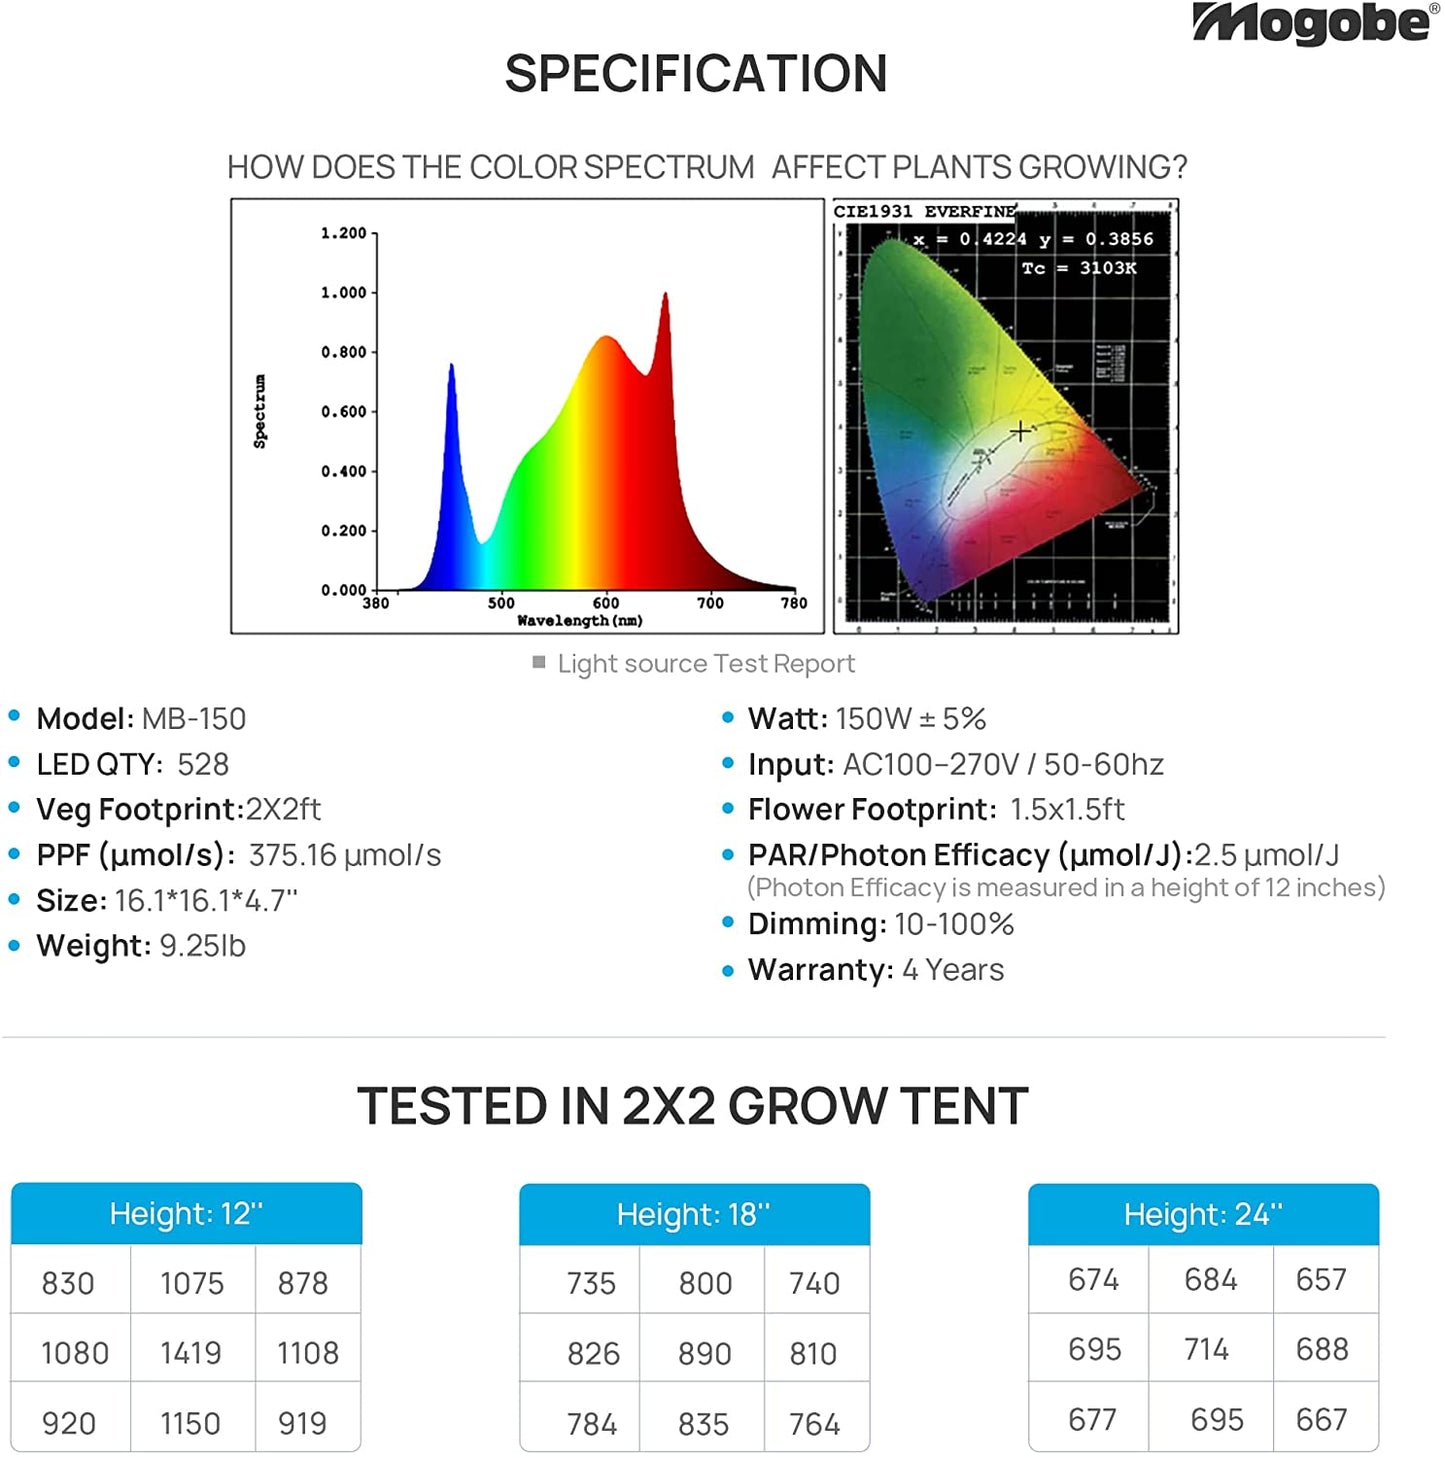 specification of 150w led grow light including ppf, ppe, ppfd